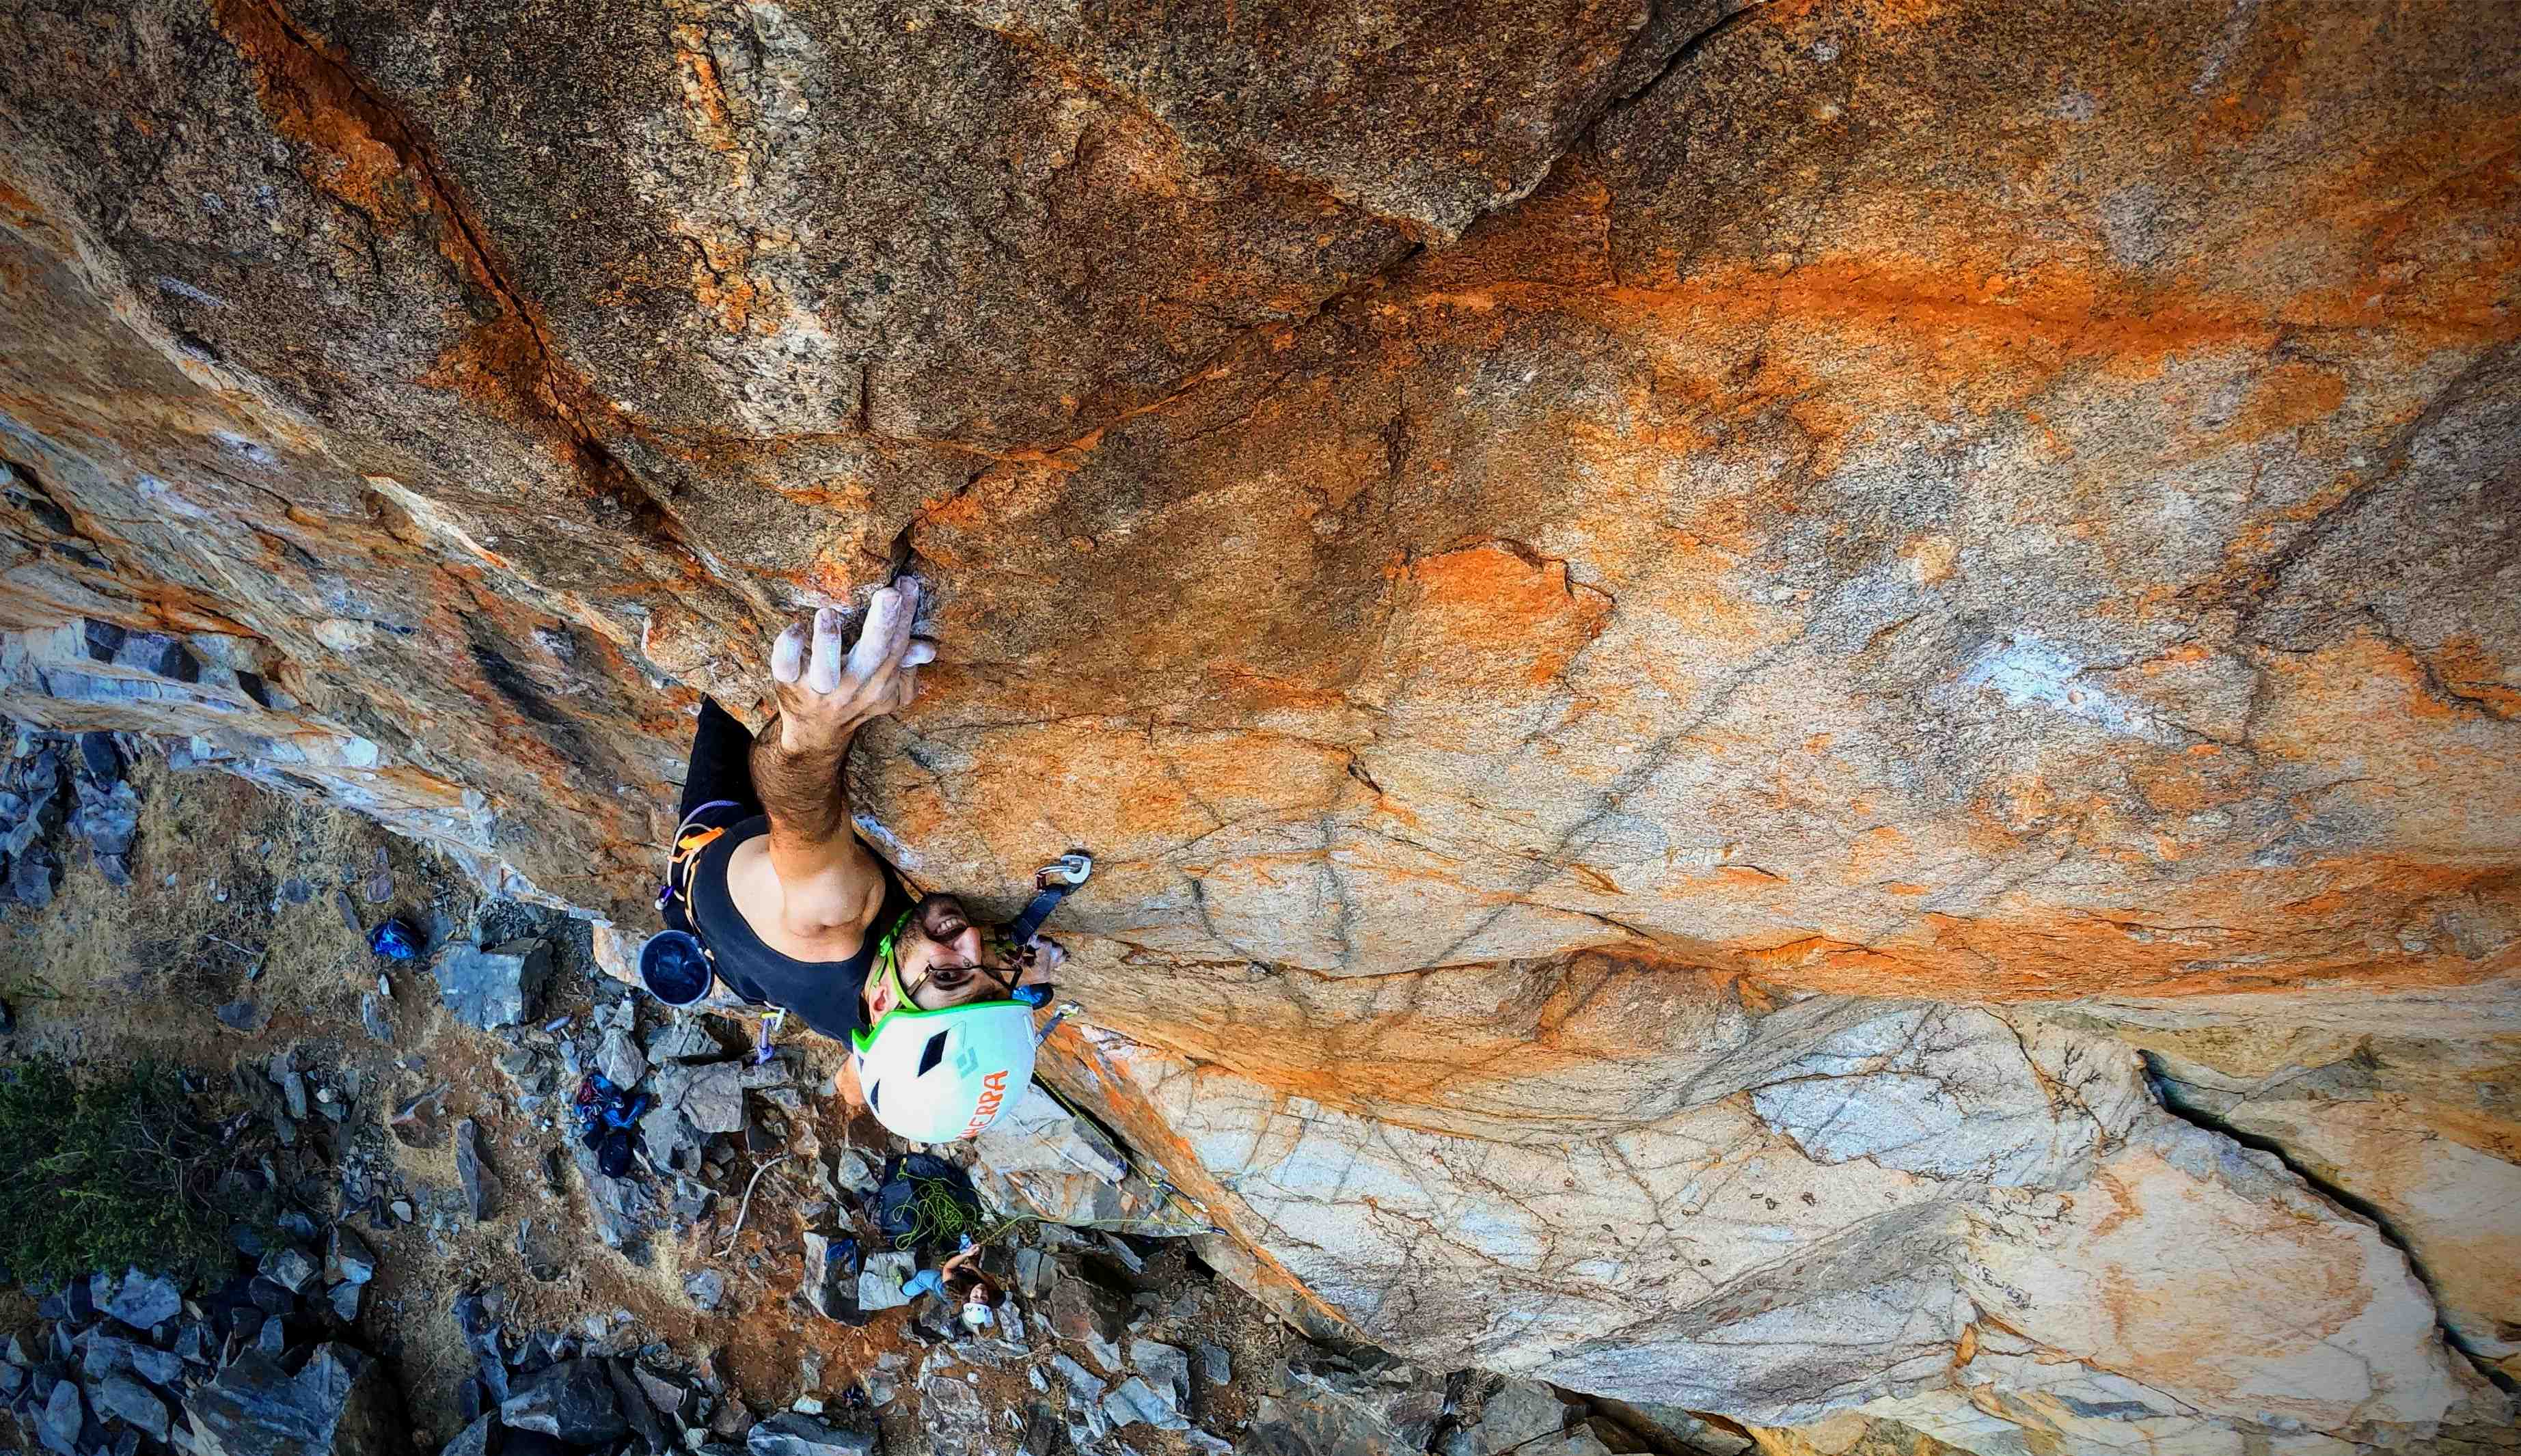 Mental Training for Climbing: An Interview with Migue Sancho